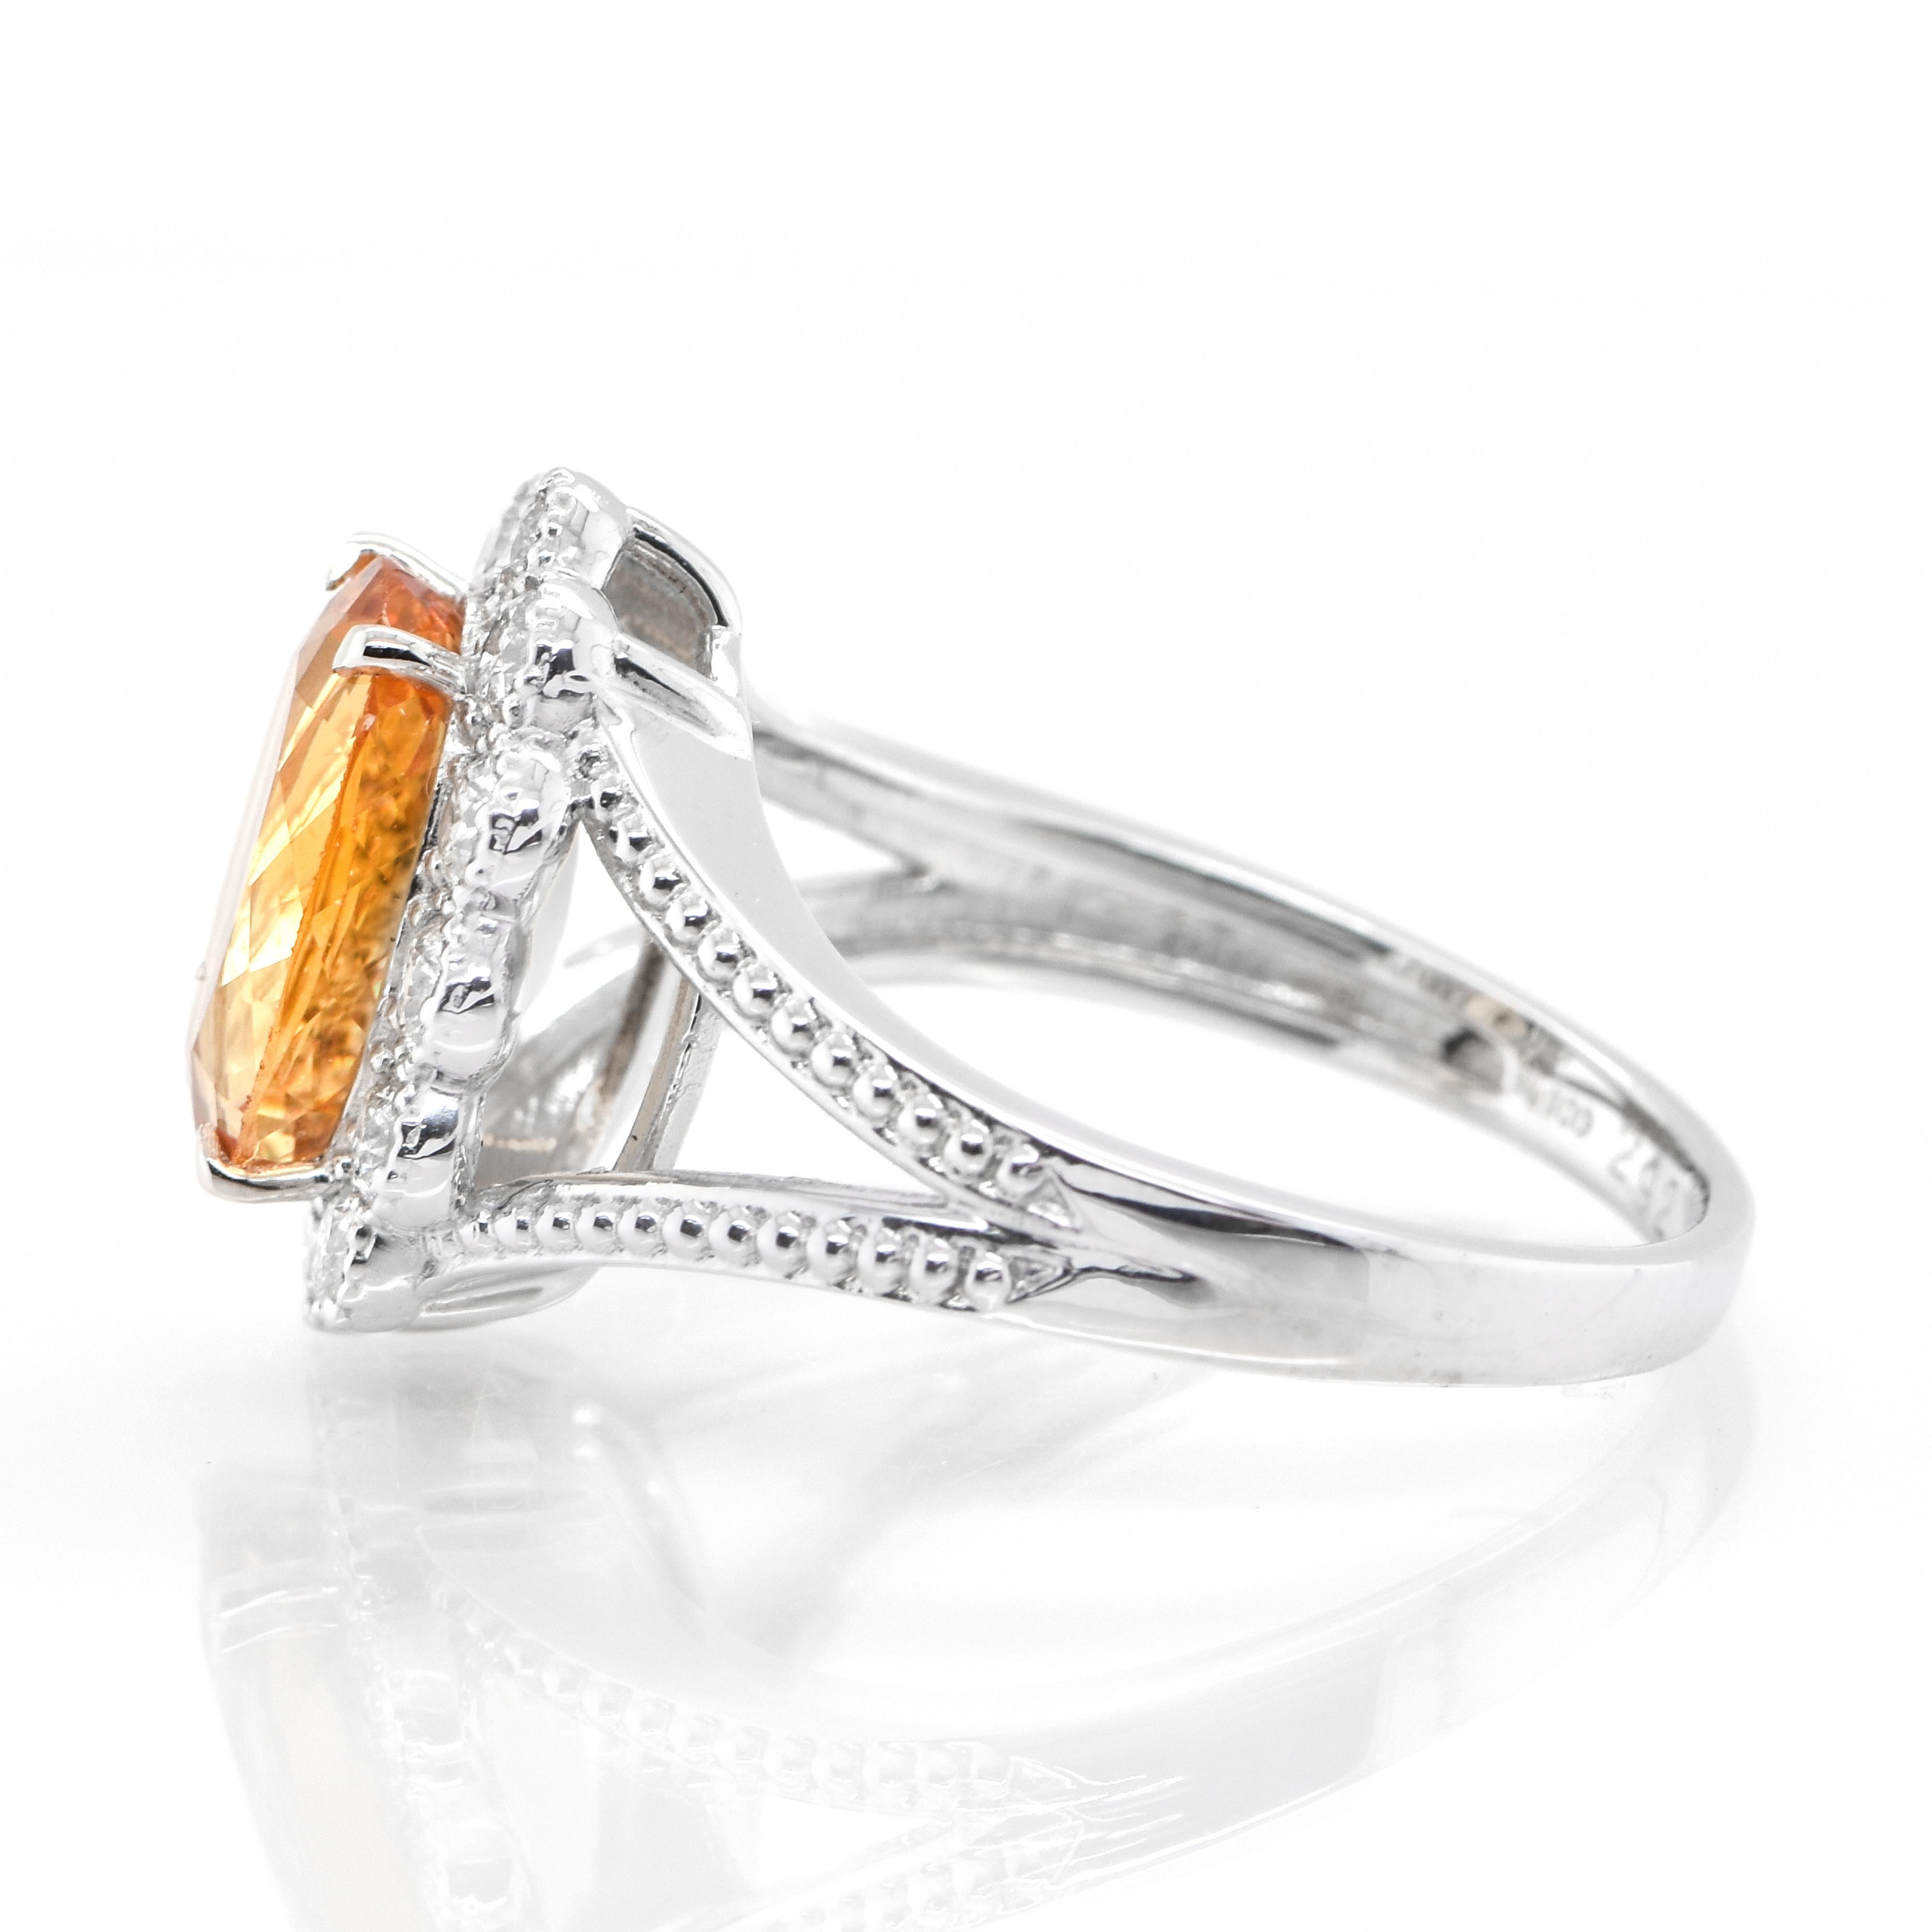 Modern 2.92 Carat Natural Imperial Topaz and Diamond Ring Set in Platinum